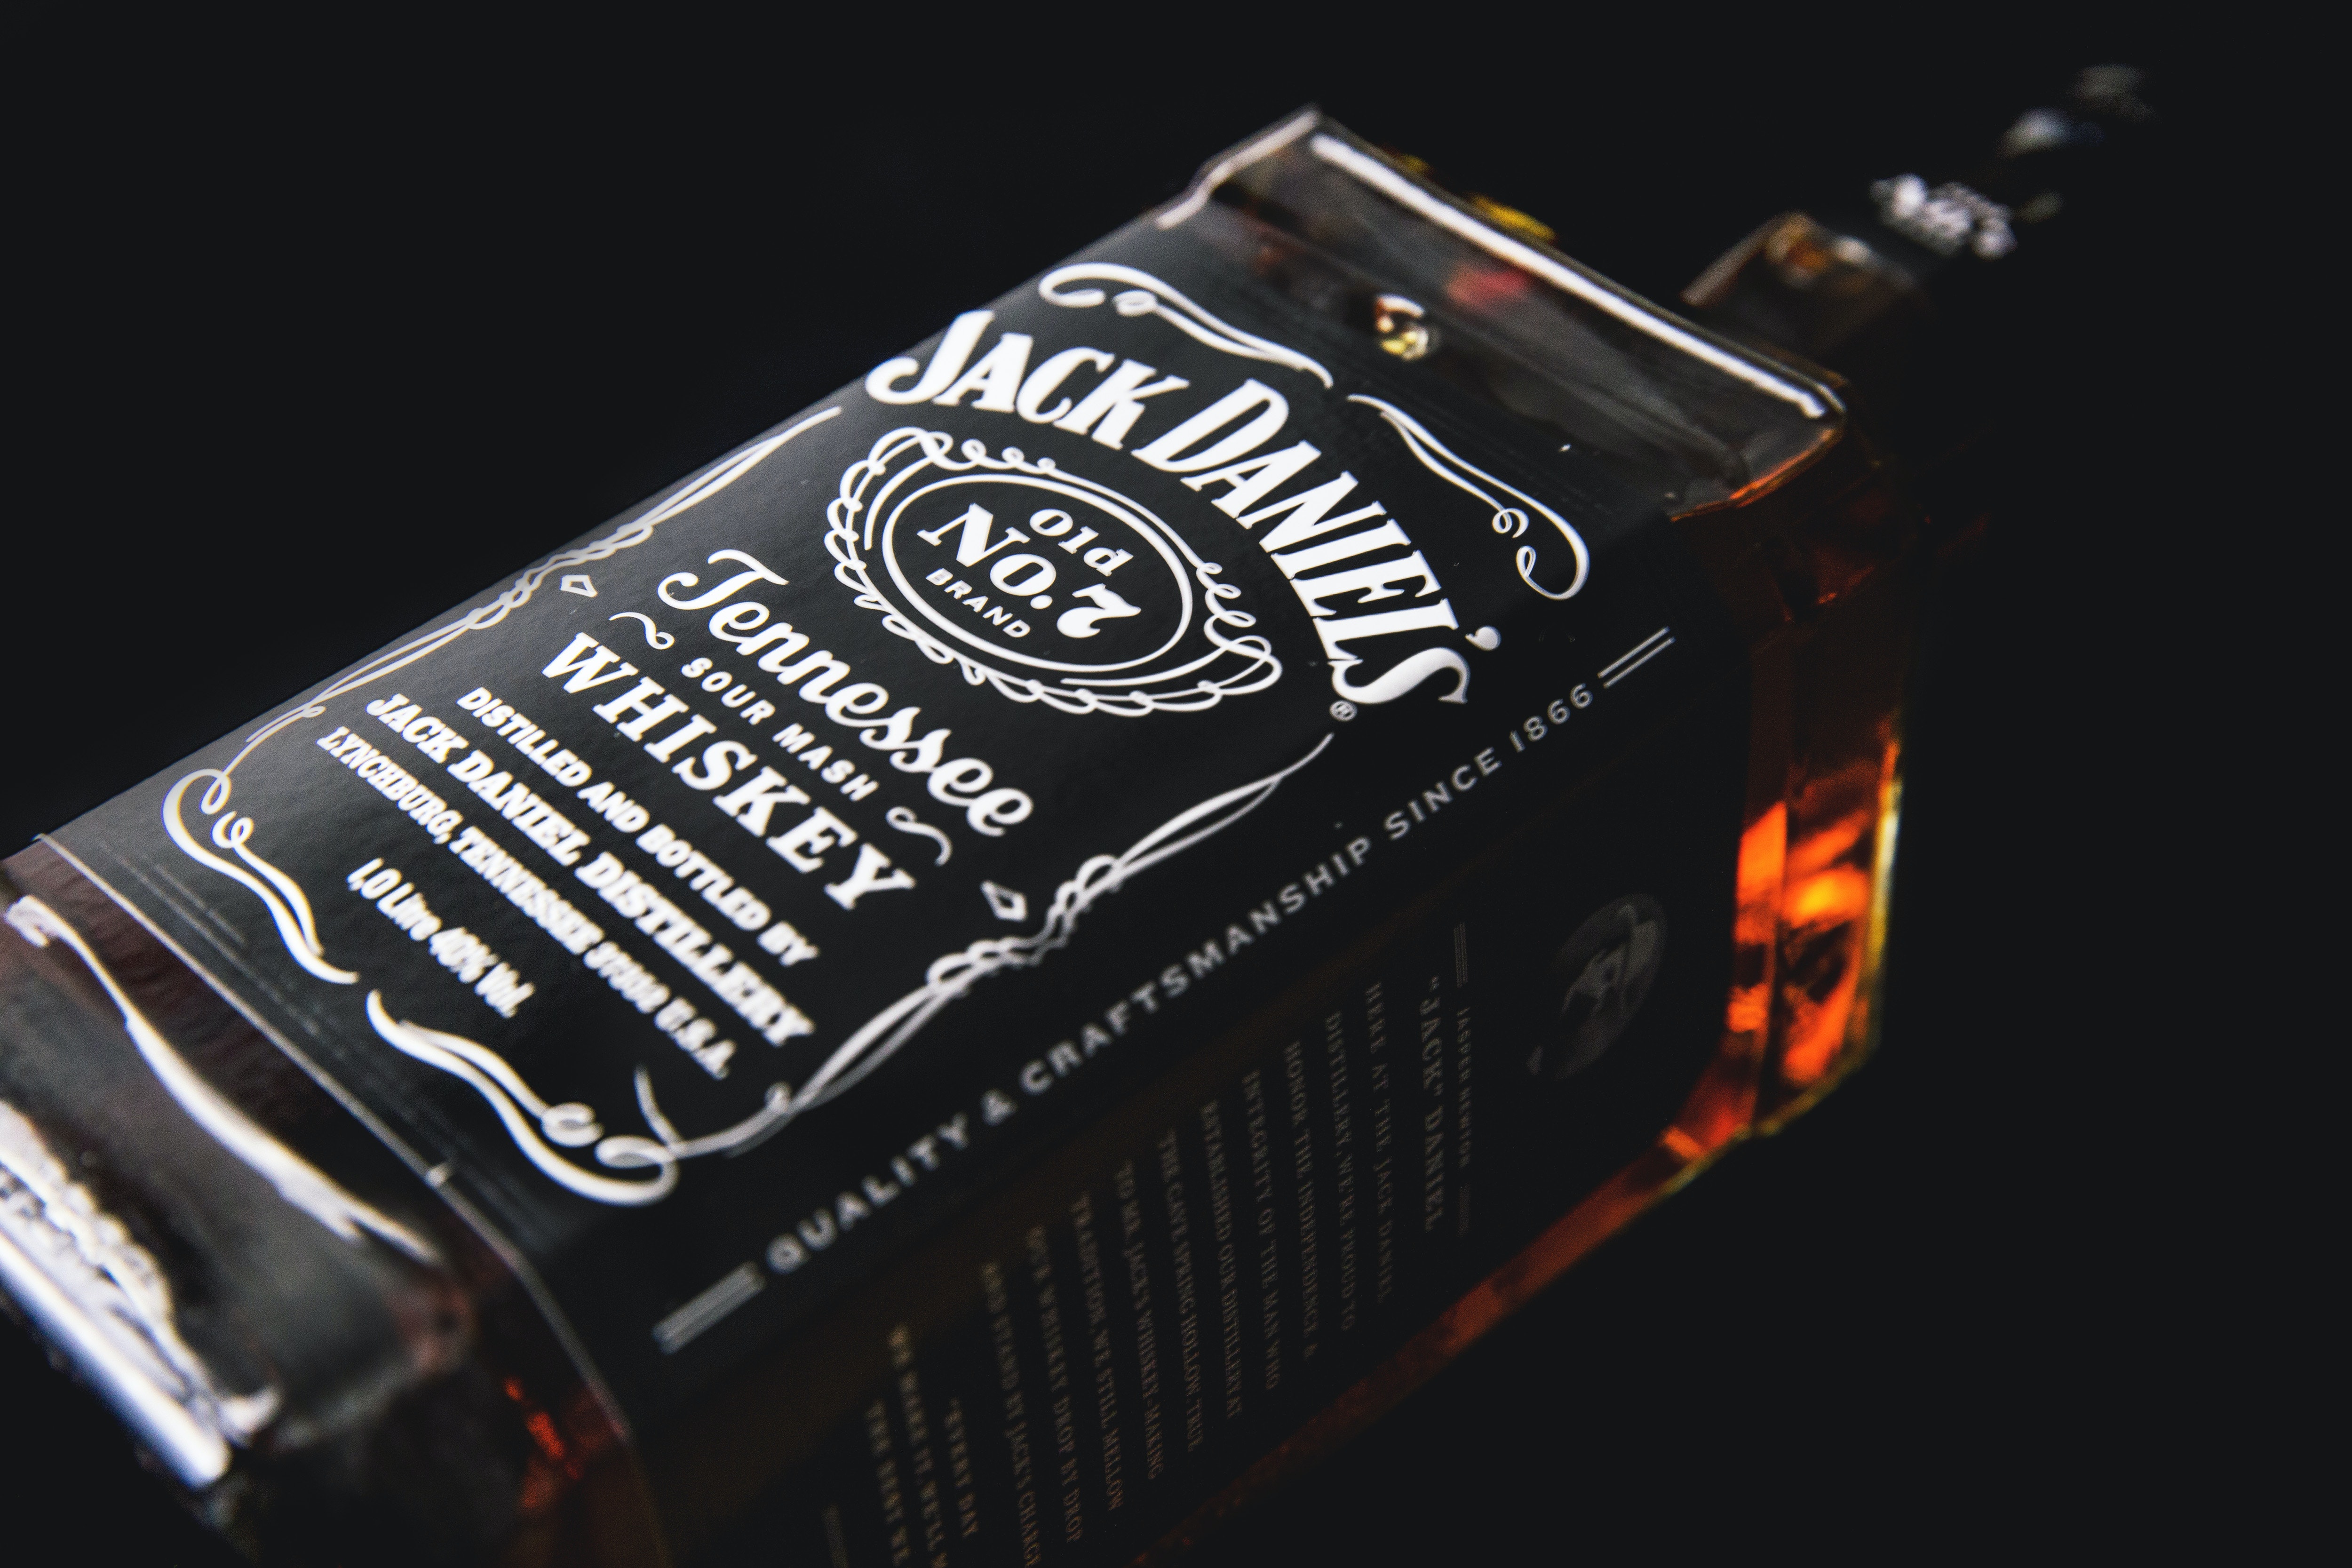 Whiskey photos download the best free whiskey stock photos hd images